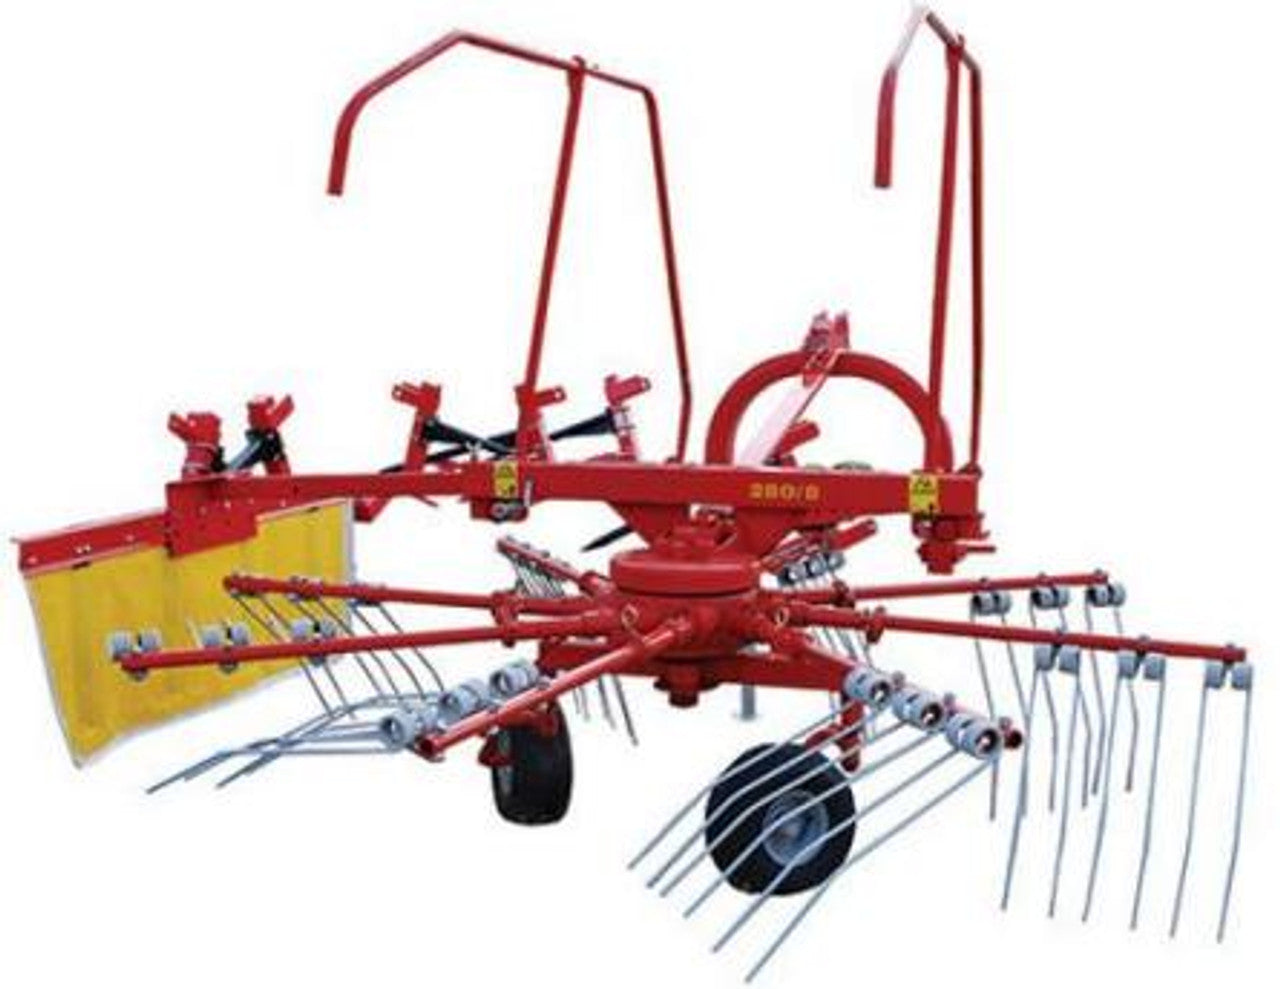 FARM-MAXX 110" ROTARY HAY RAKE MODEL FRM-280 WITH FLEXIBLE TINES FOR TRACTOR